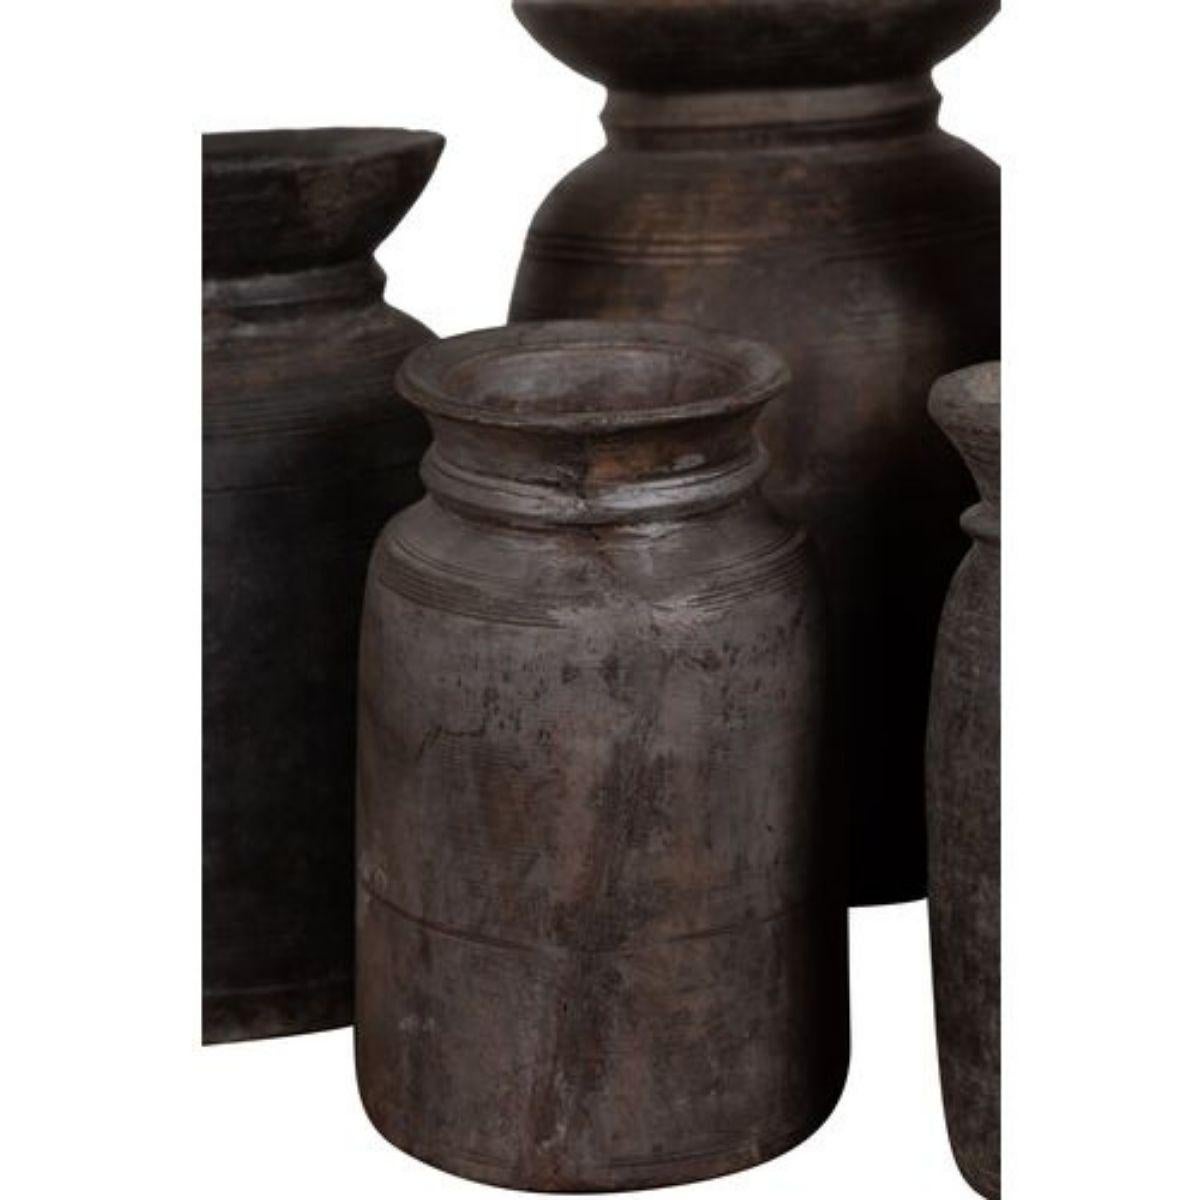 Nepalese Rustic Wooden Ghee Pots Sold in Sets of Three or Five In Fair Condition For Sale In Yonkers, NY